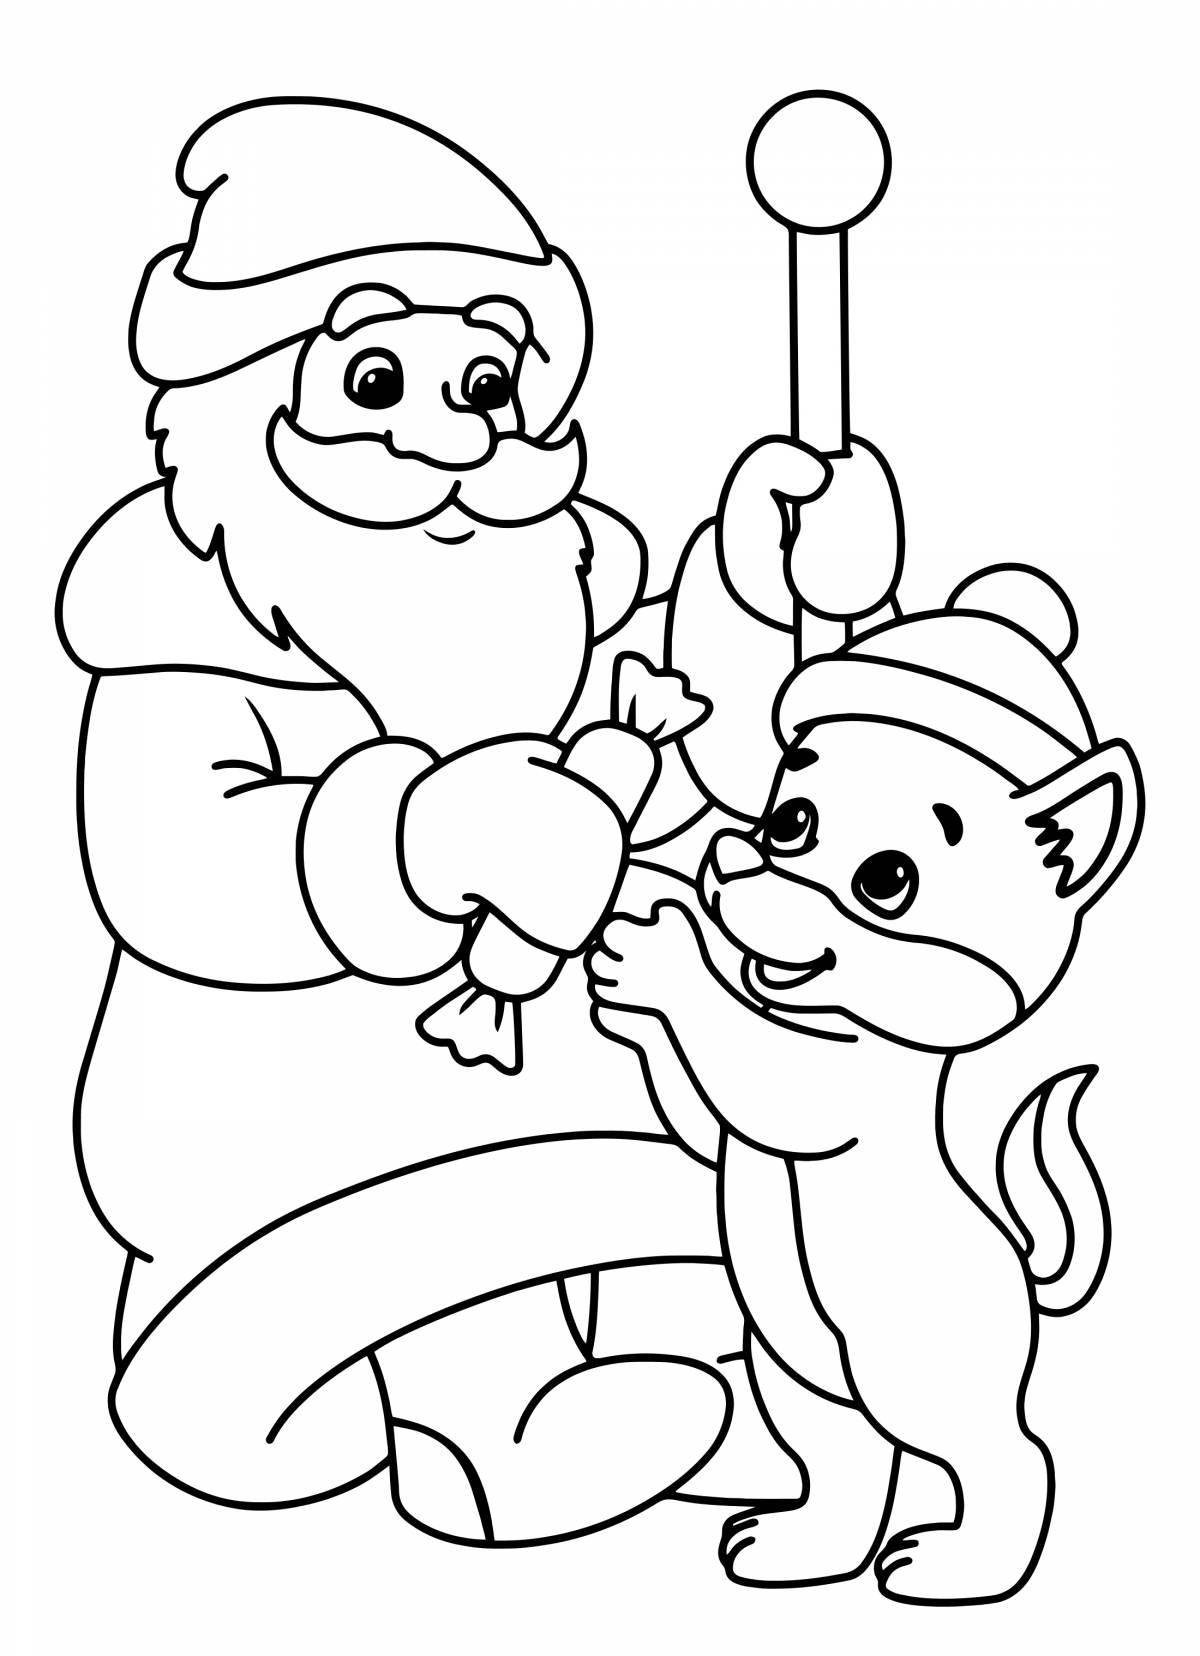 Gorgeous Christmas animals coloring book